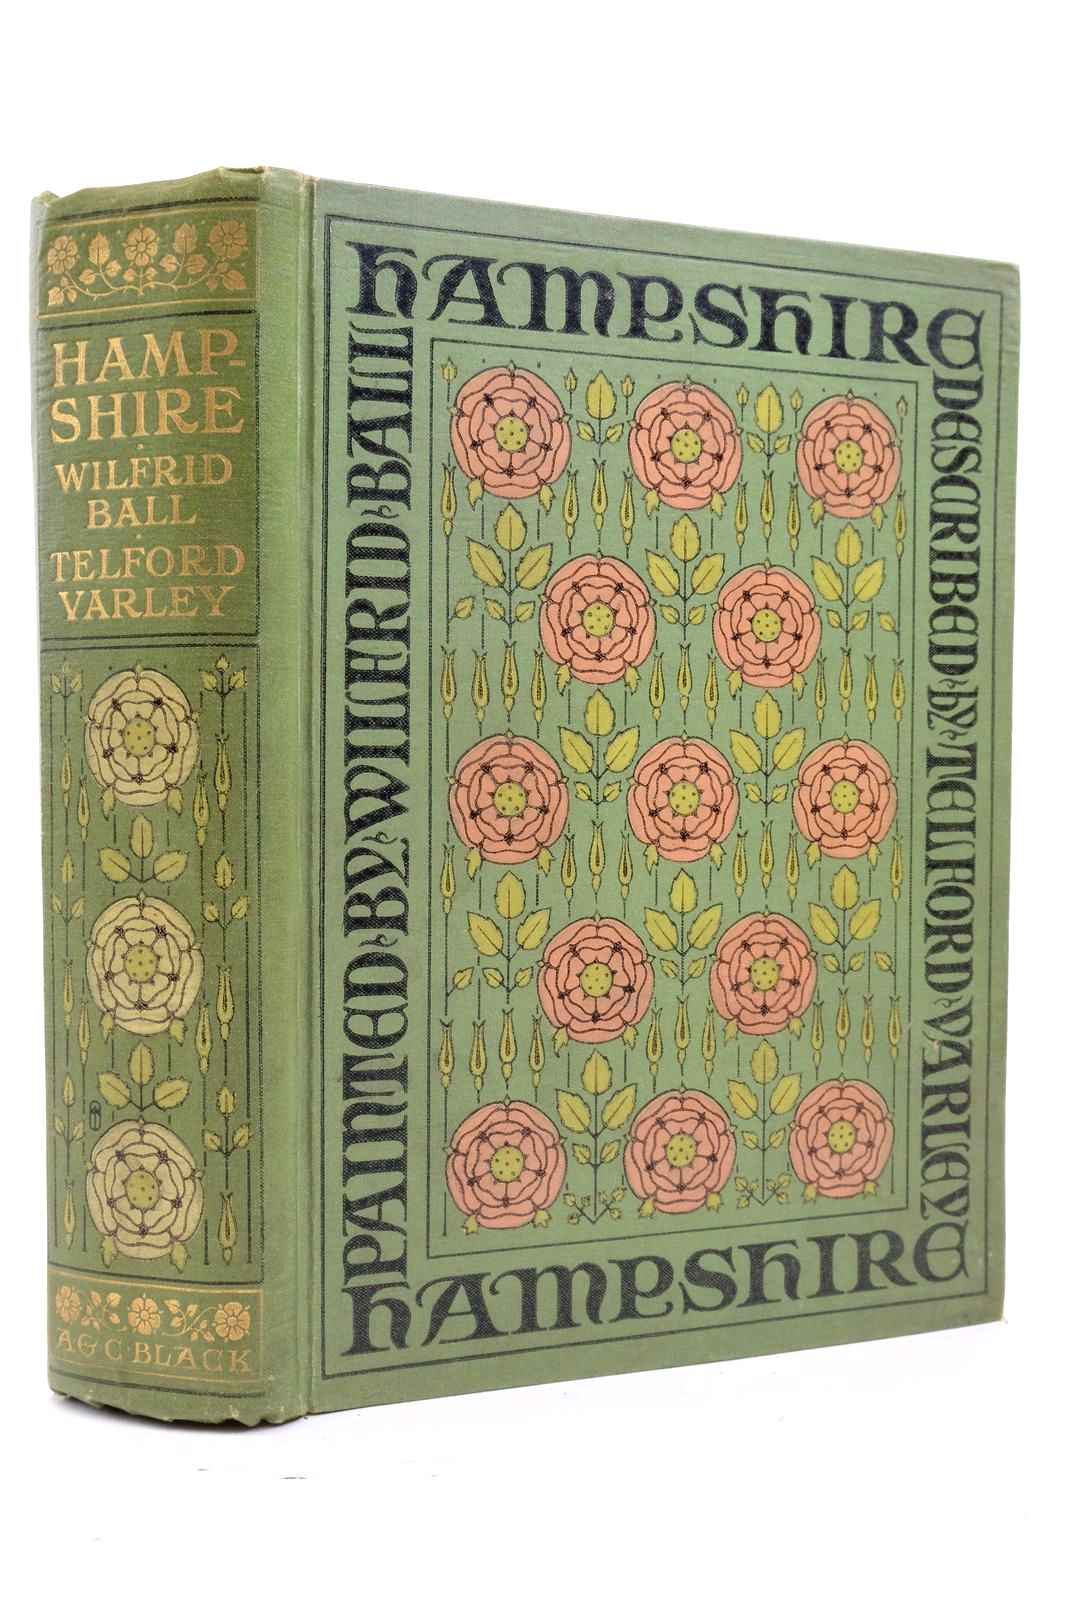 Photo of HAMPSHIRE written by Varley, Telford illustrated by Ball, Wilfrid published by Adam &amp; Charles Black (STOCK CODE: 2137554)  for sale by Stella & Rose's Books